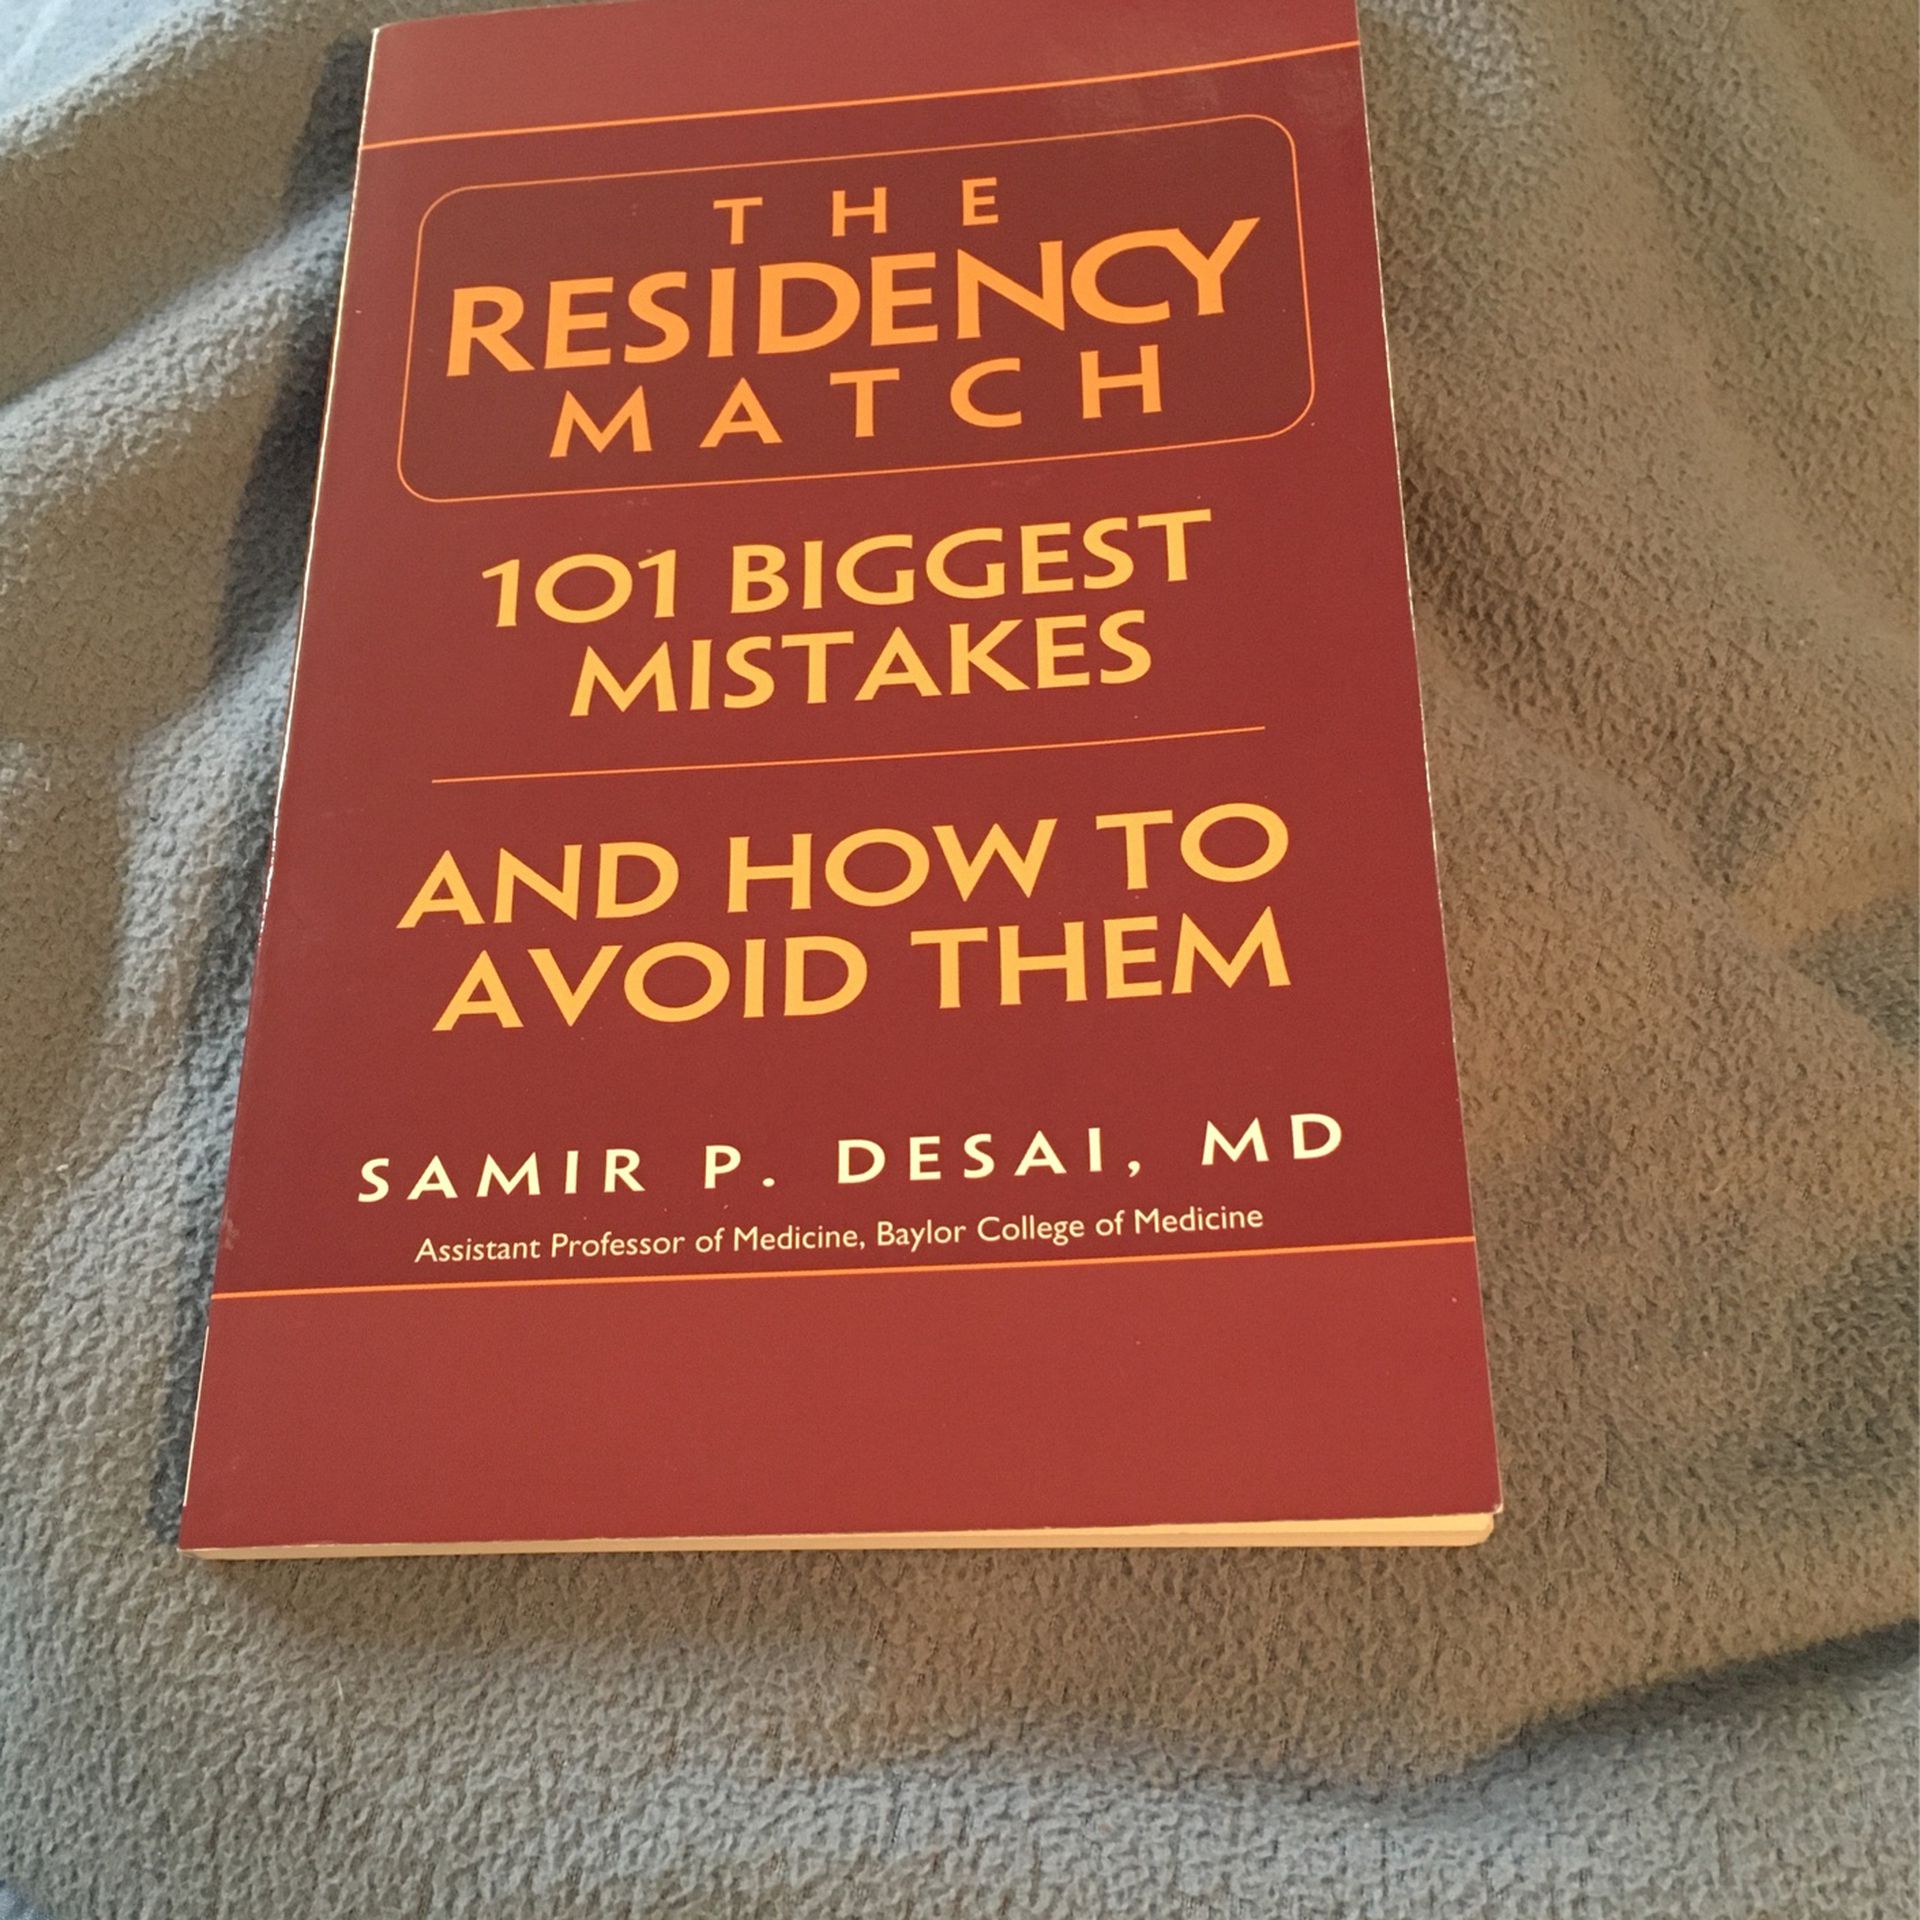 THE RESIDENCY MATCH - 101 Biggest Mistakes . And How To Avoid Them .